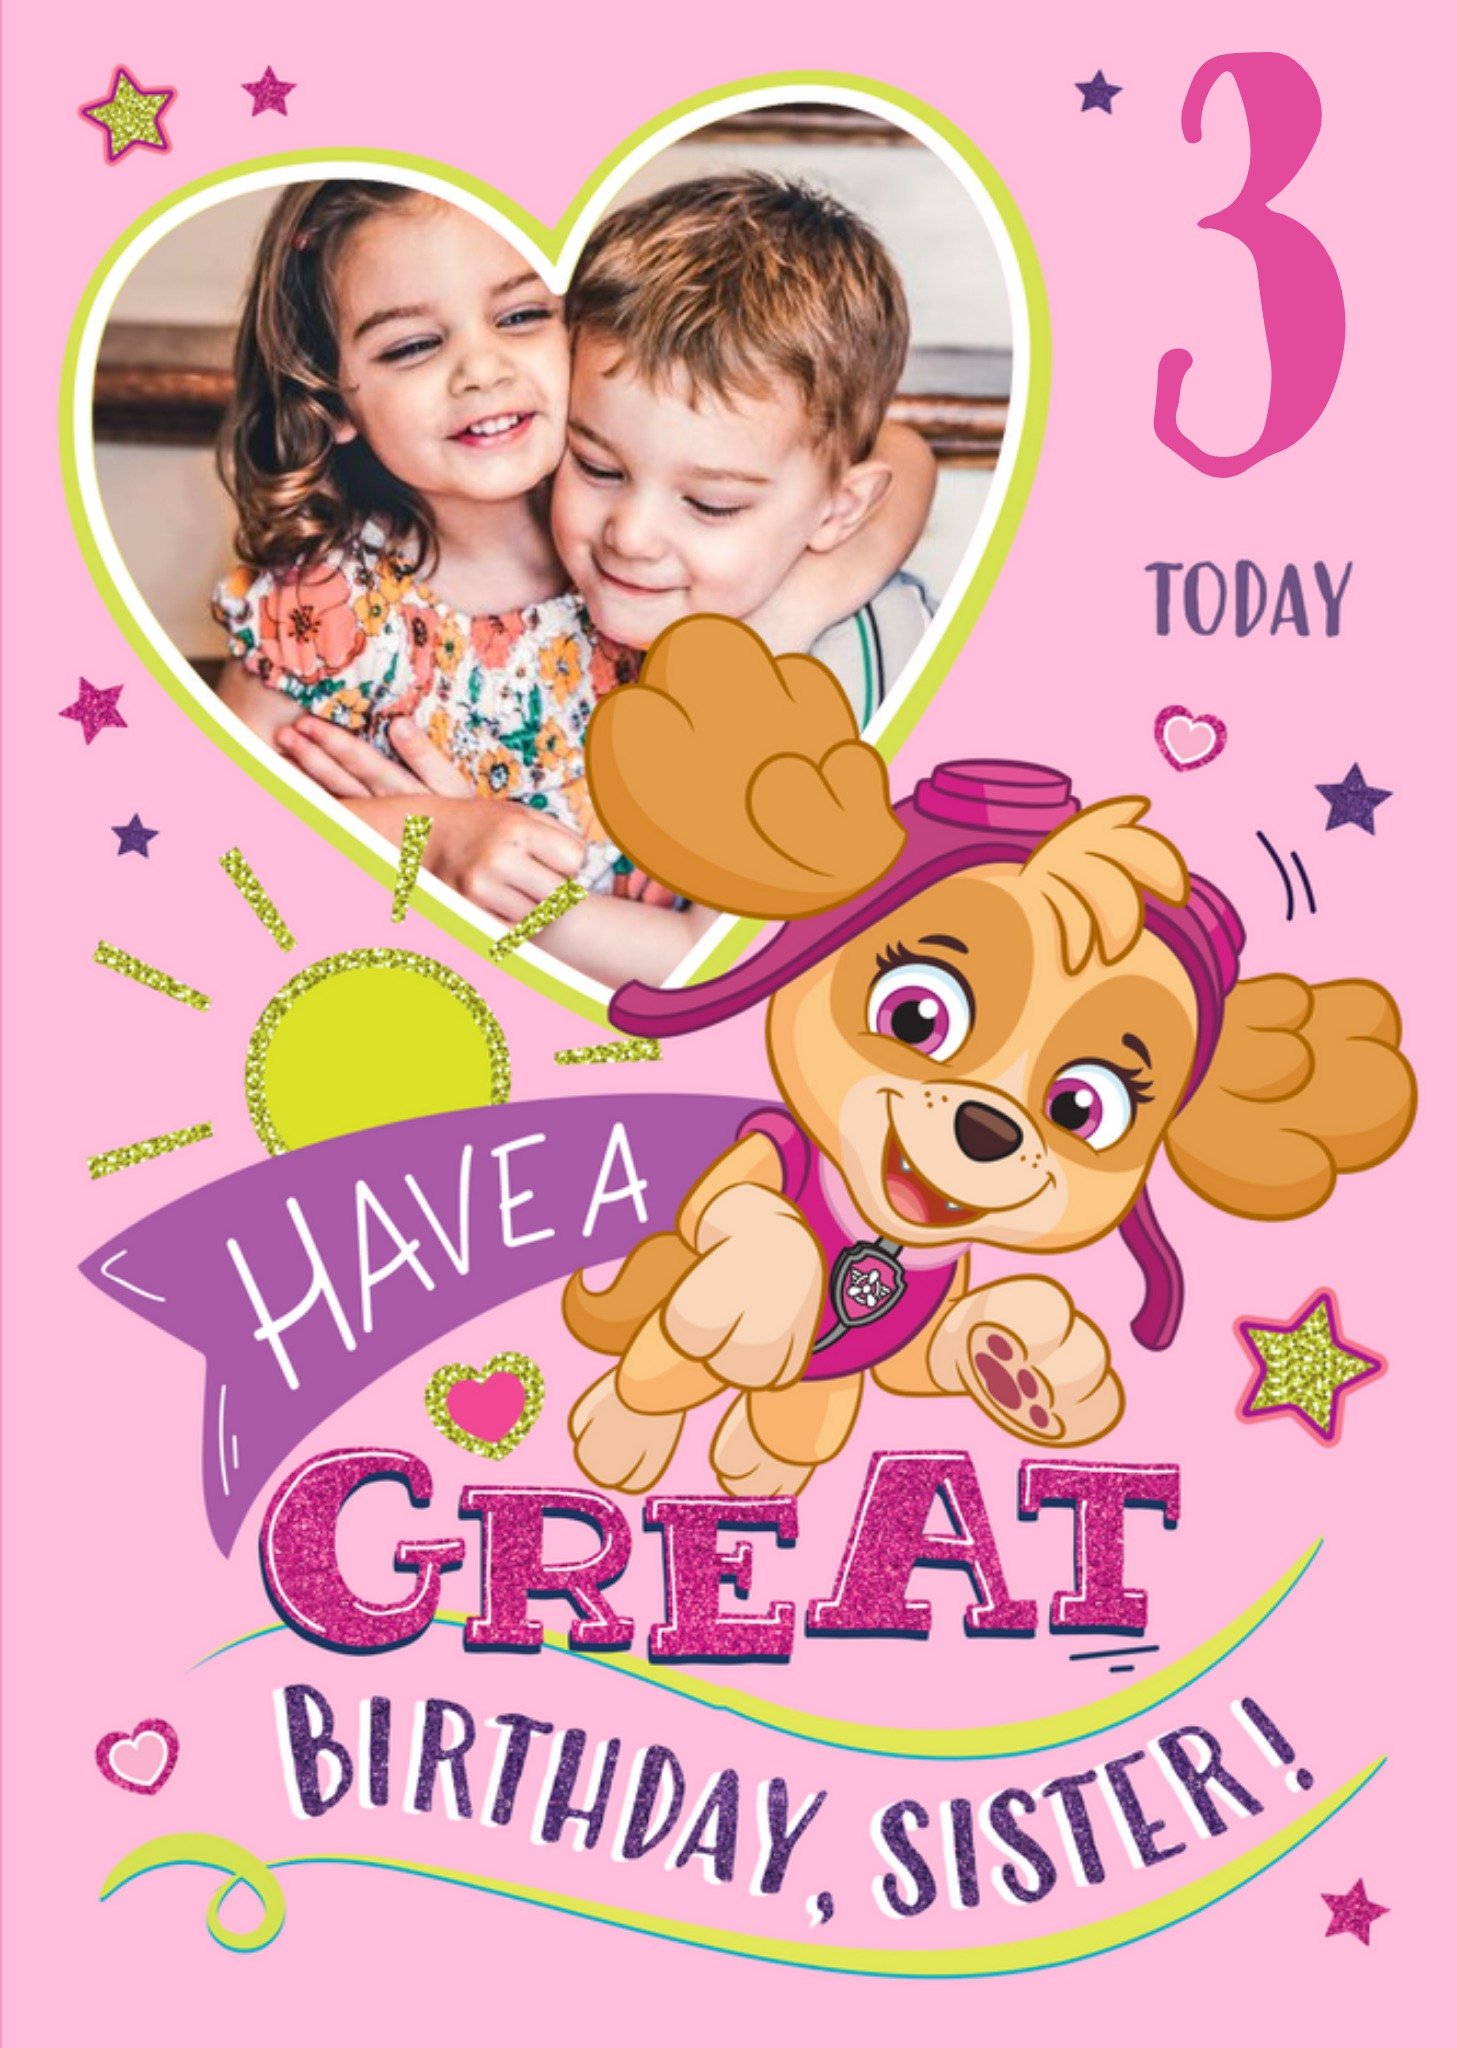 Paw Patrol Photo Upload Birthday Card For Sister Have A Great Birthday, Large